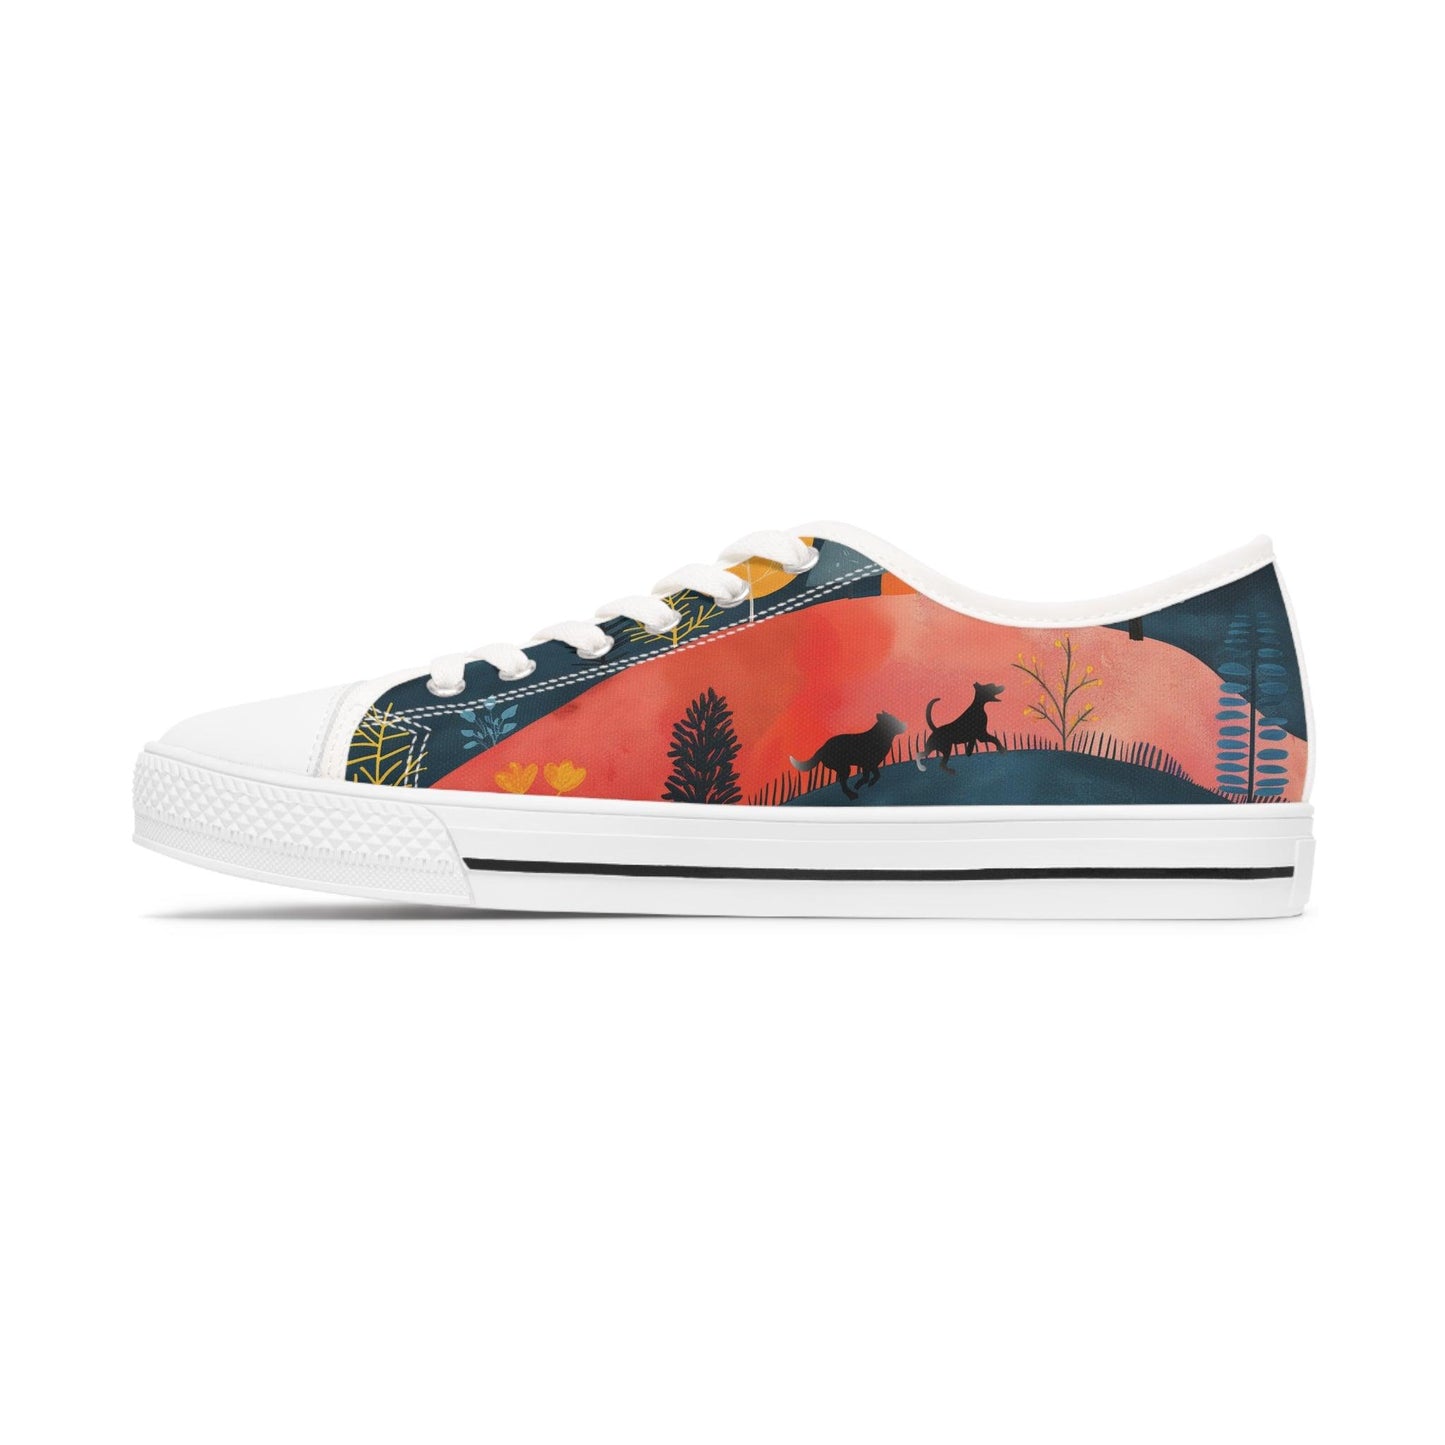 Women's Low-Top Trainers featuring Cottage Core Style Dogs Running Free Design - Hobbster